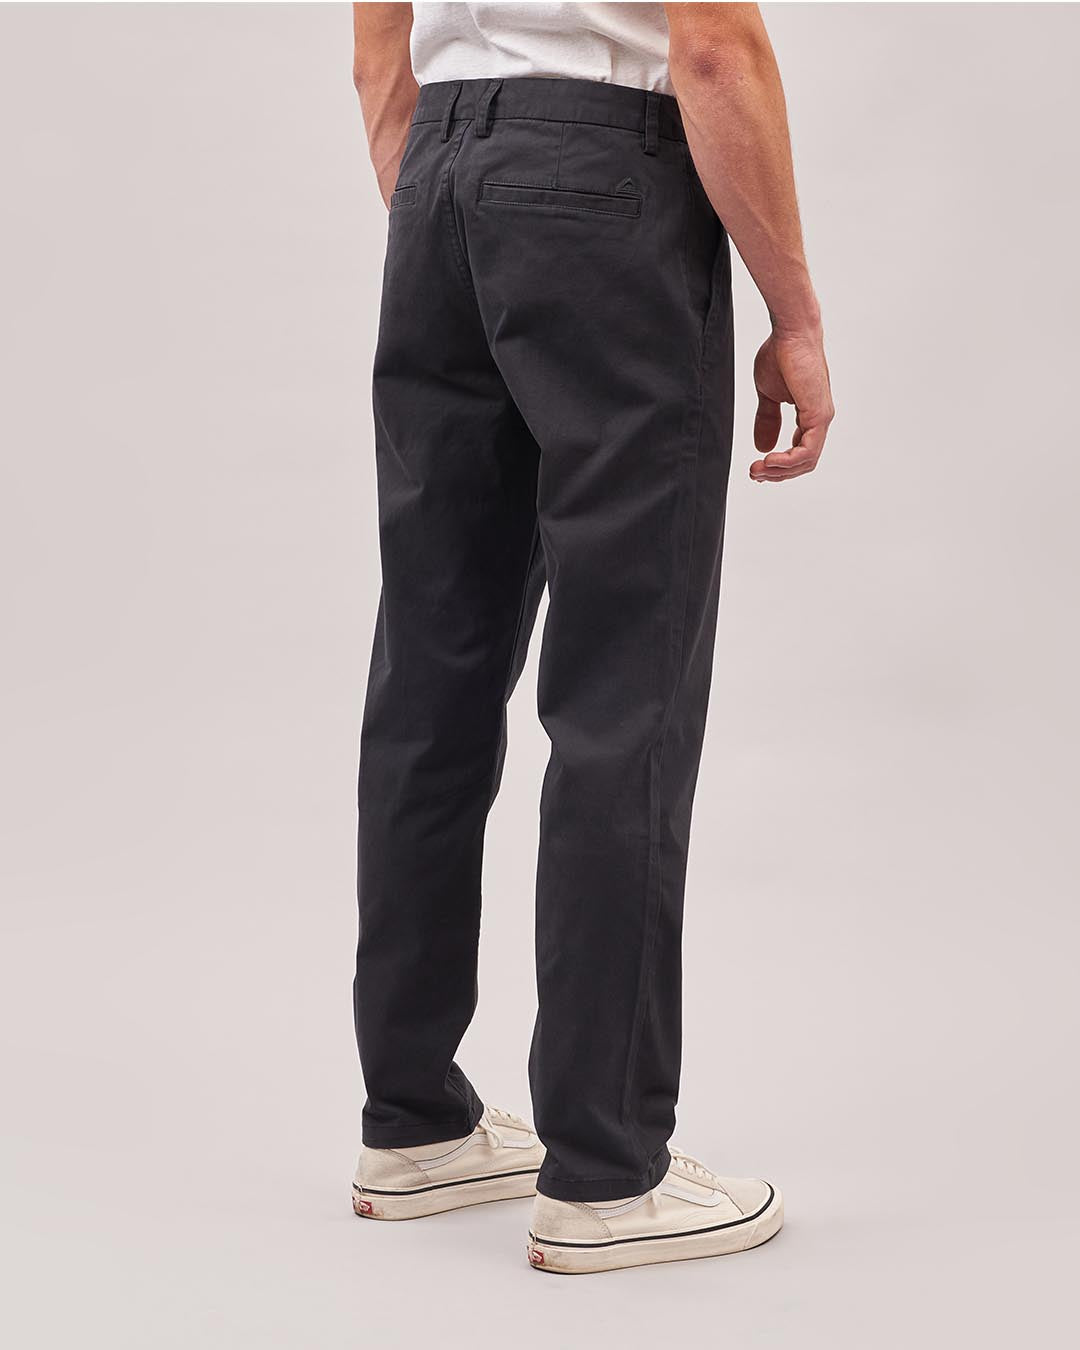 Purchase Wholesale wind pants. Free Returns & Net 60 Terms on Faire